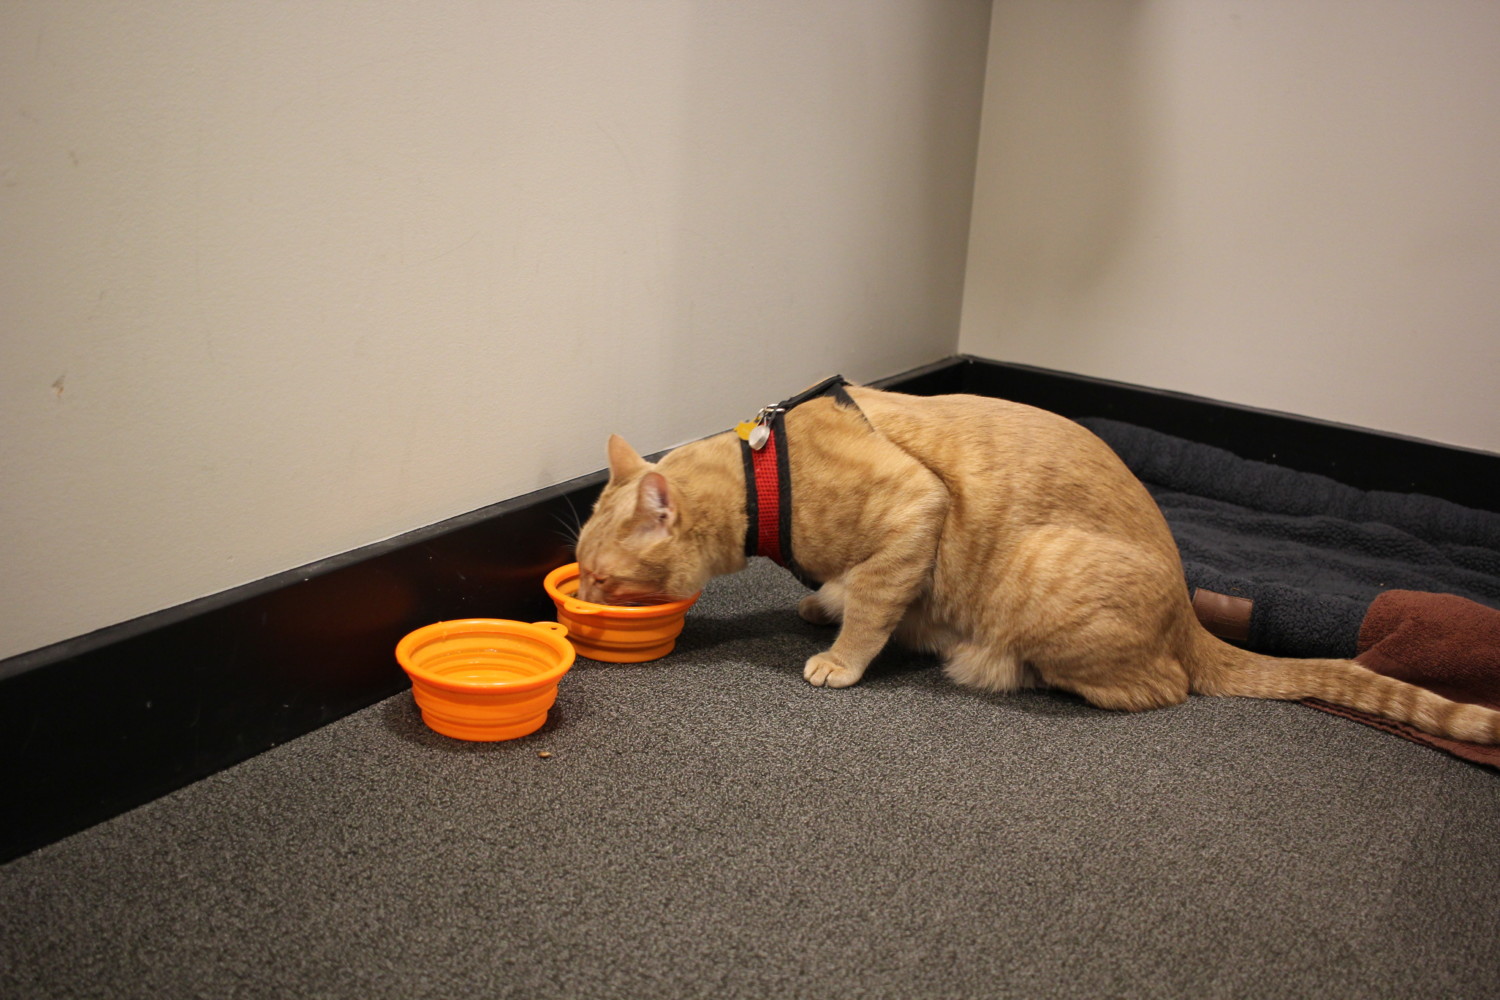 Fish the cat getting a drink from a collapsible bowl in a hotel room